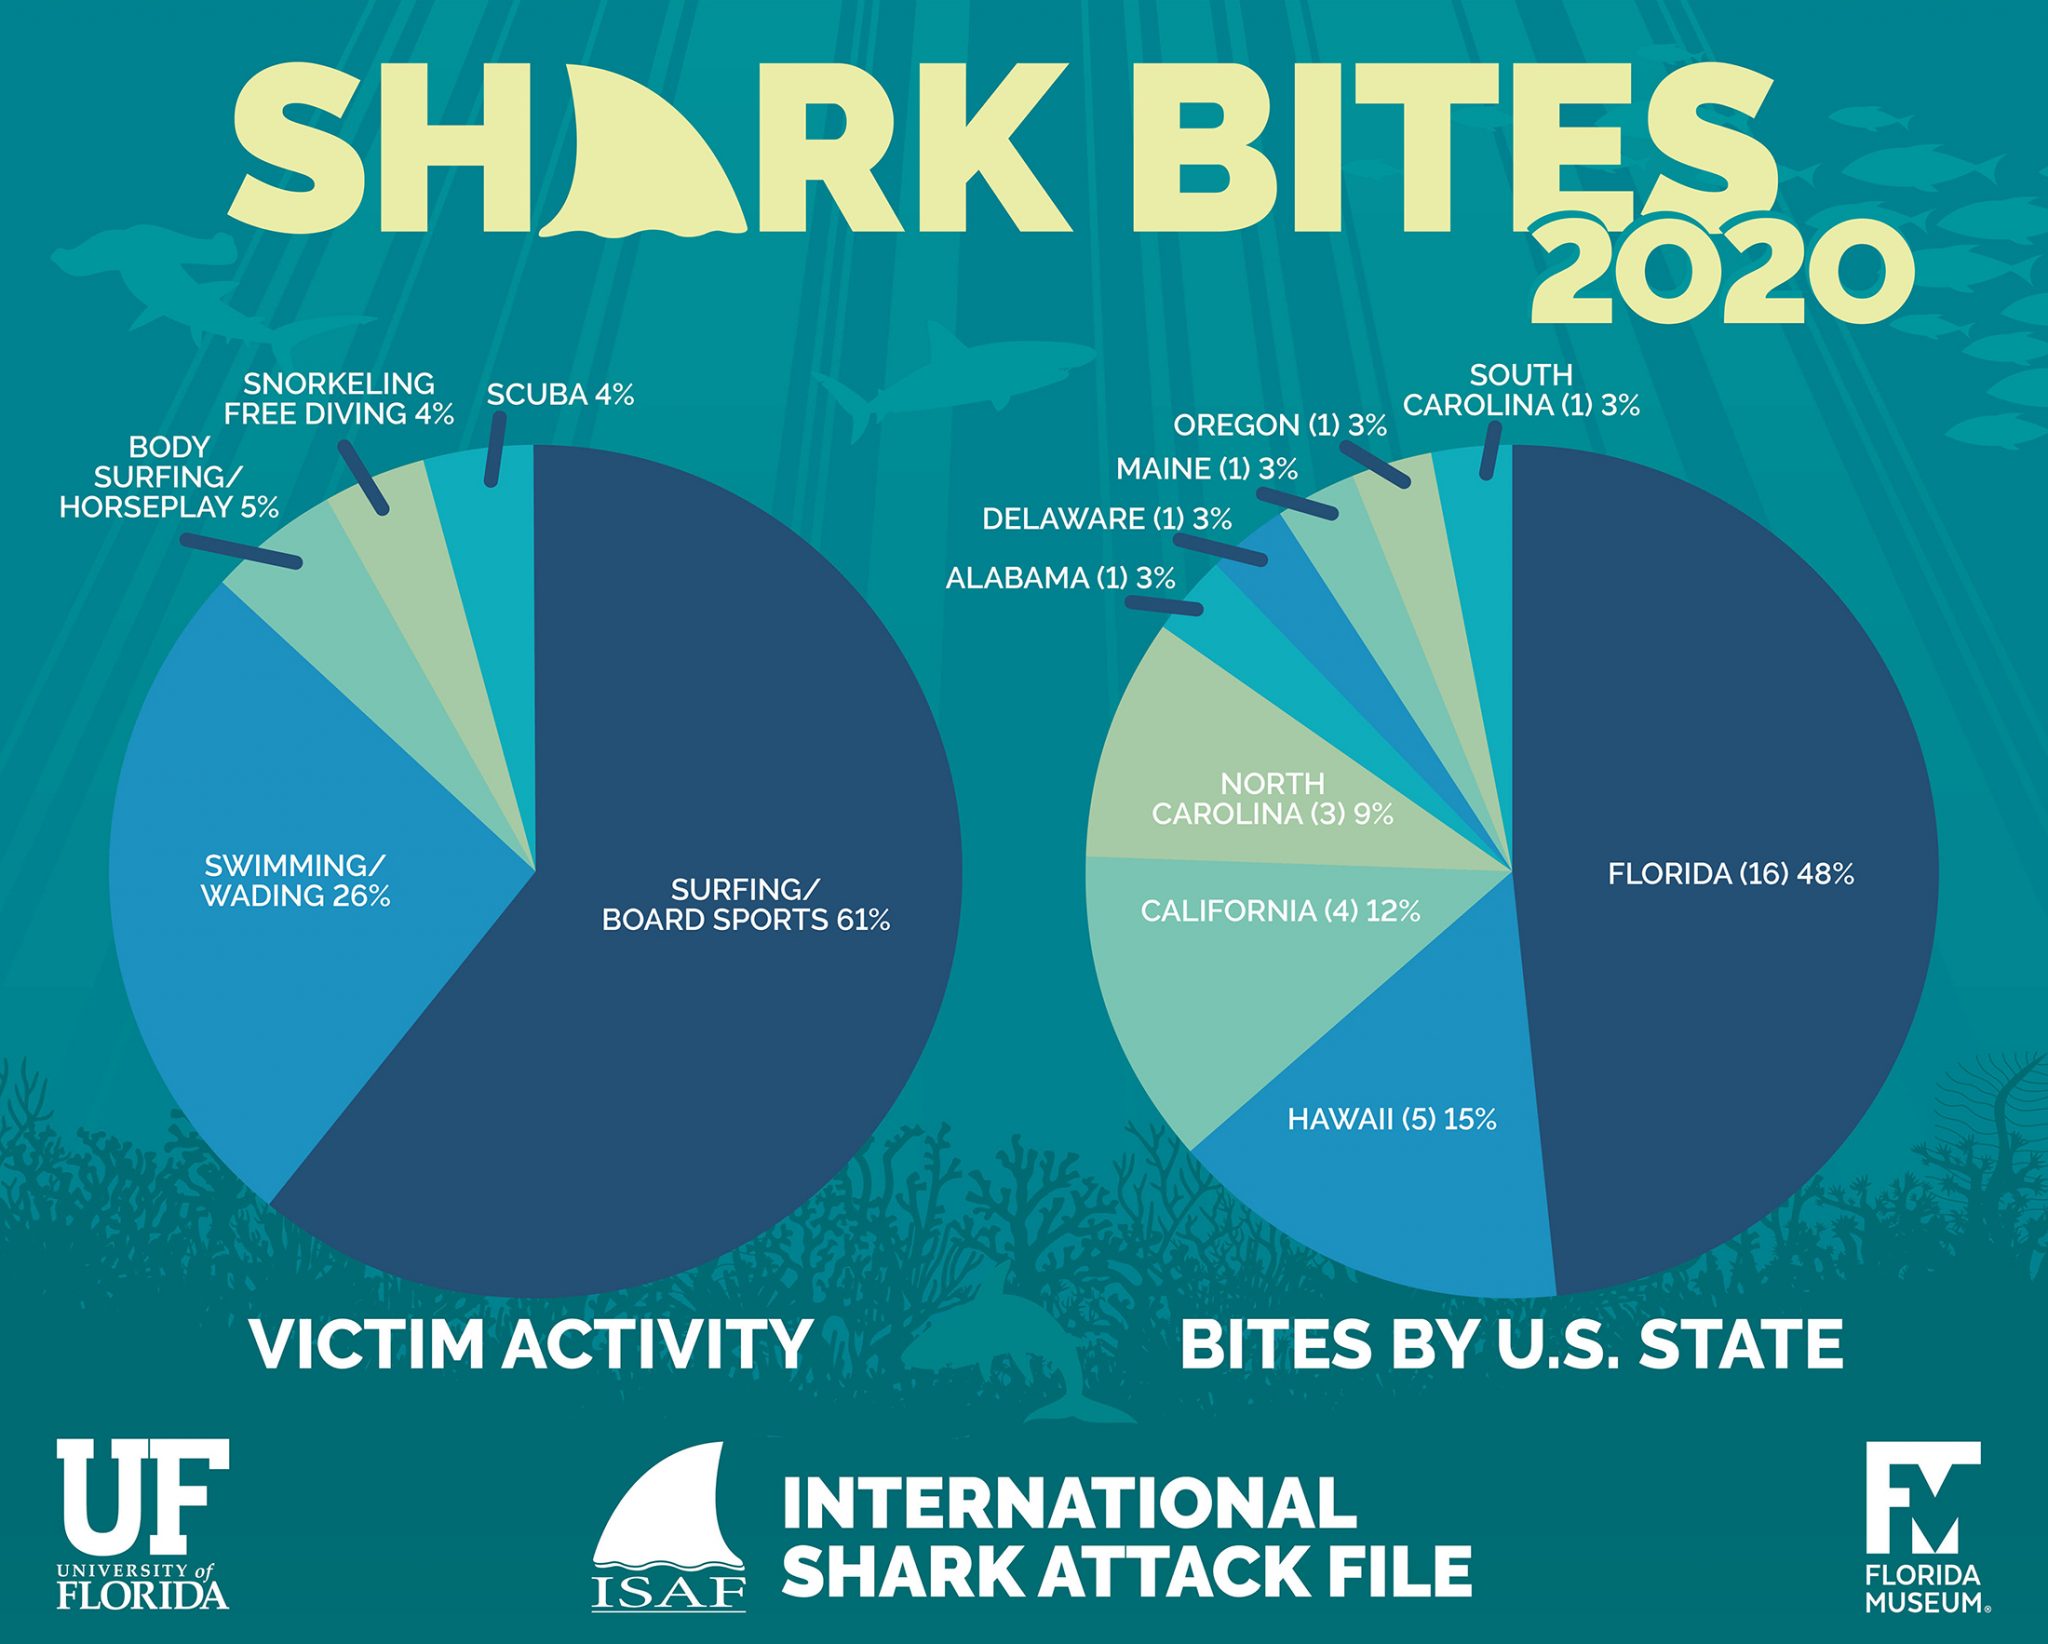 Shark attack numbers remained ‘extremely low’ in 2020, but fatalities